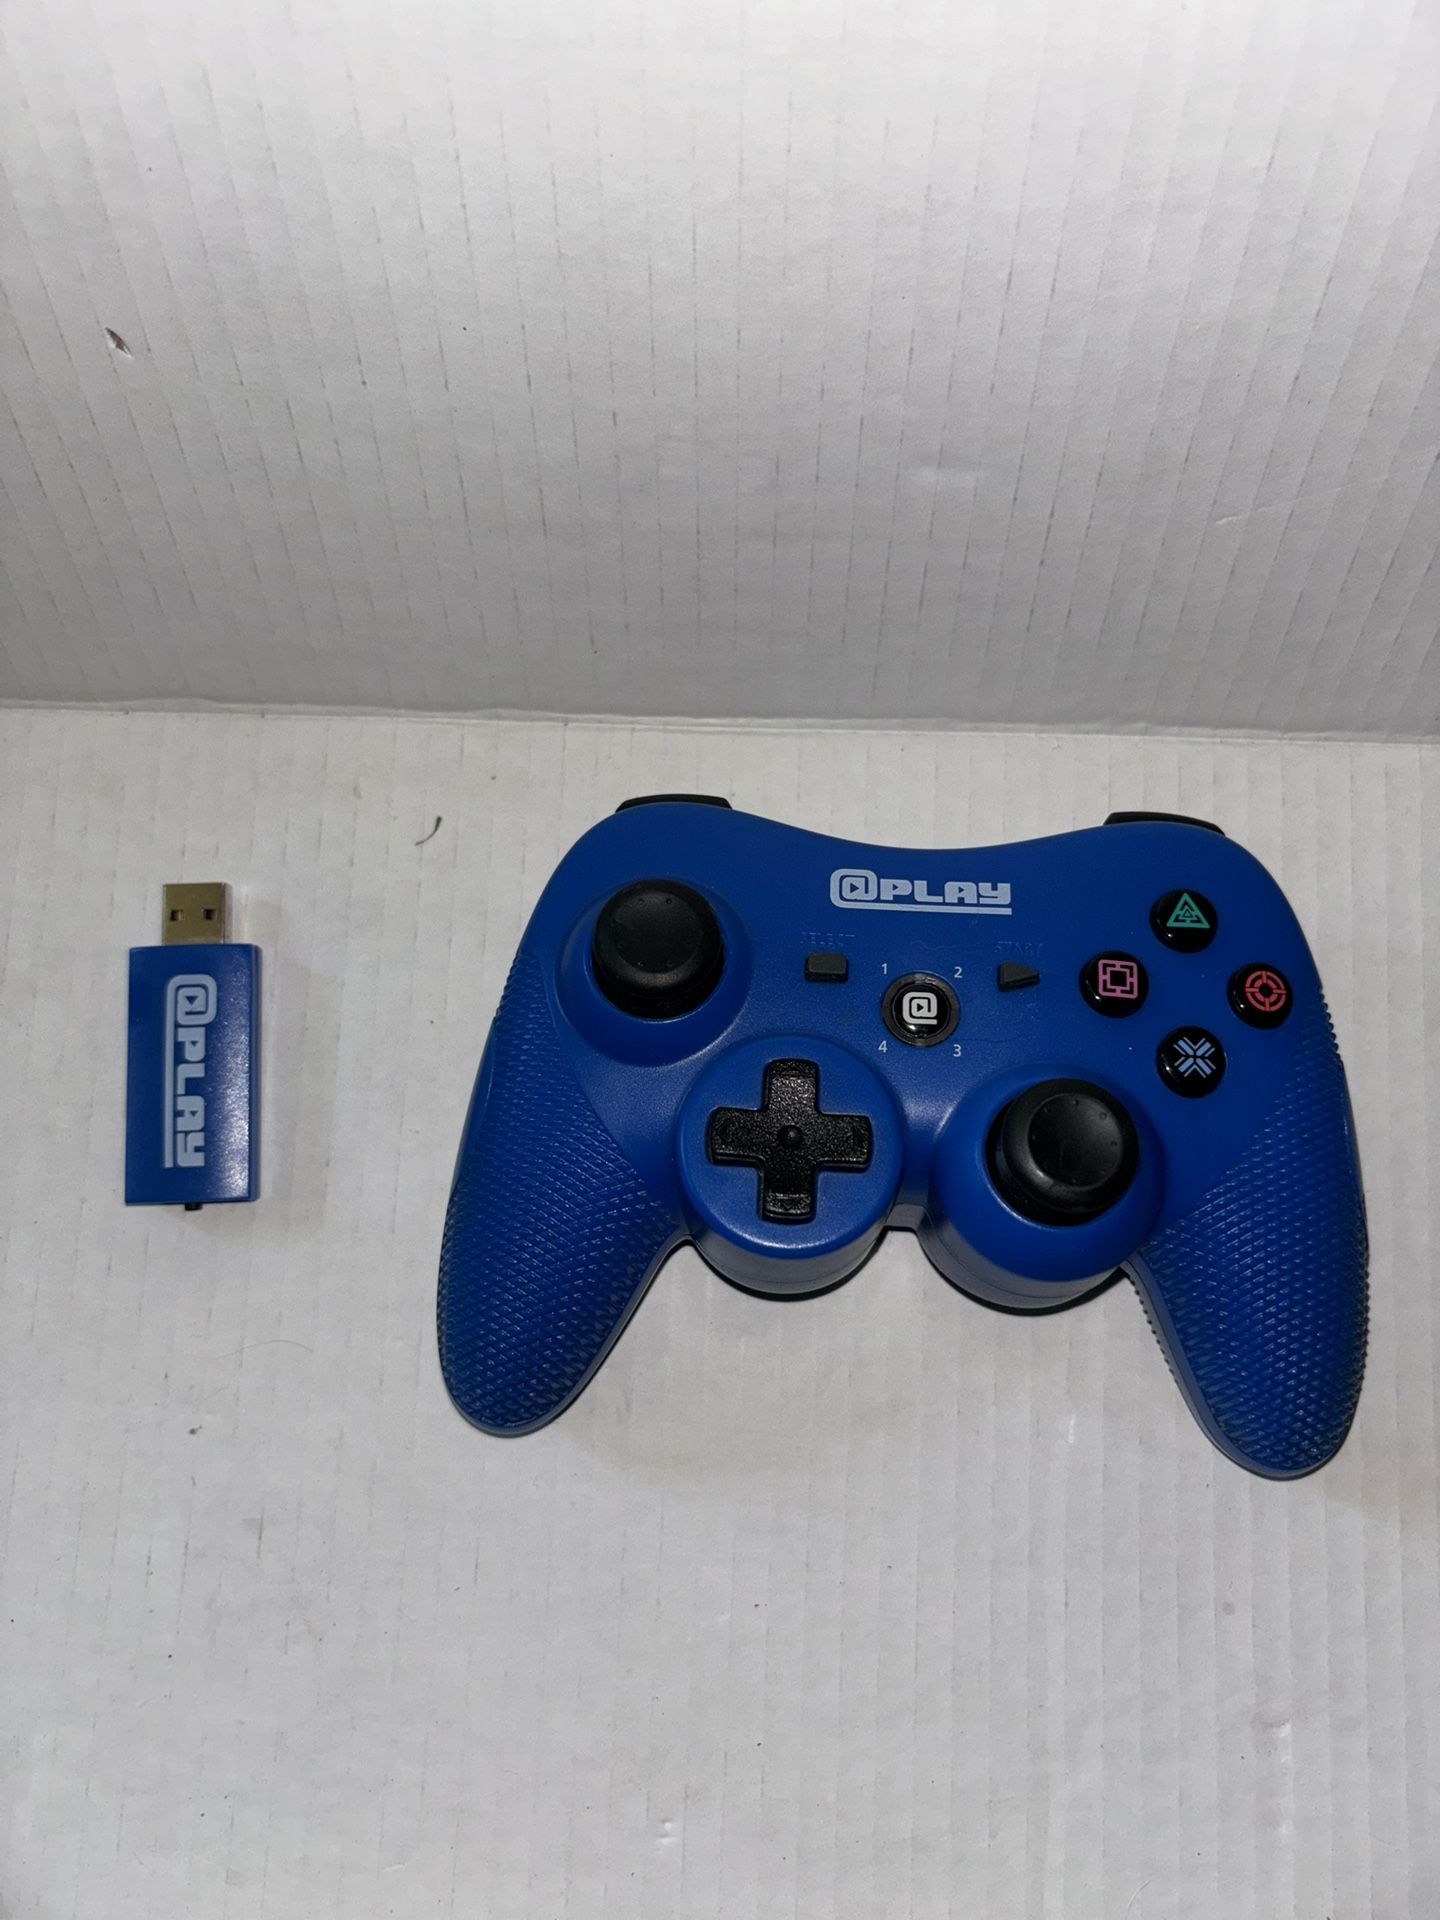 AtPlay Blue Wireless Controller Model PS3